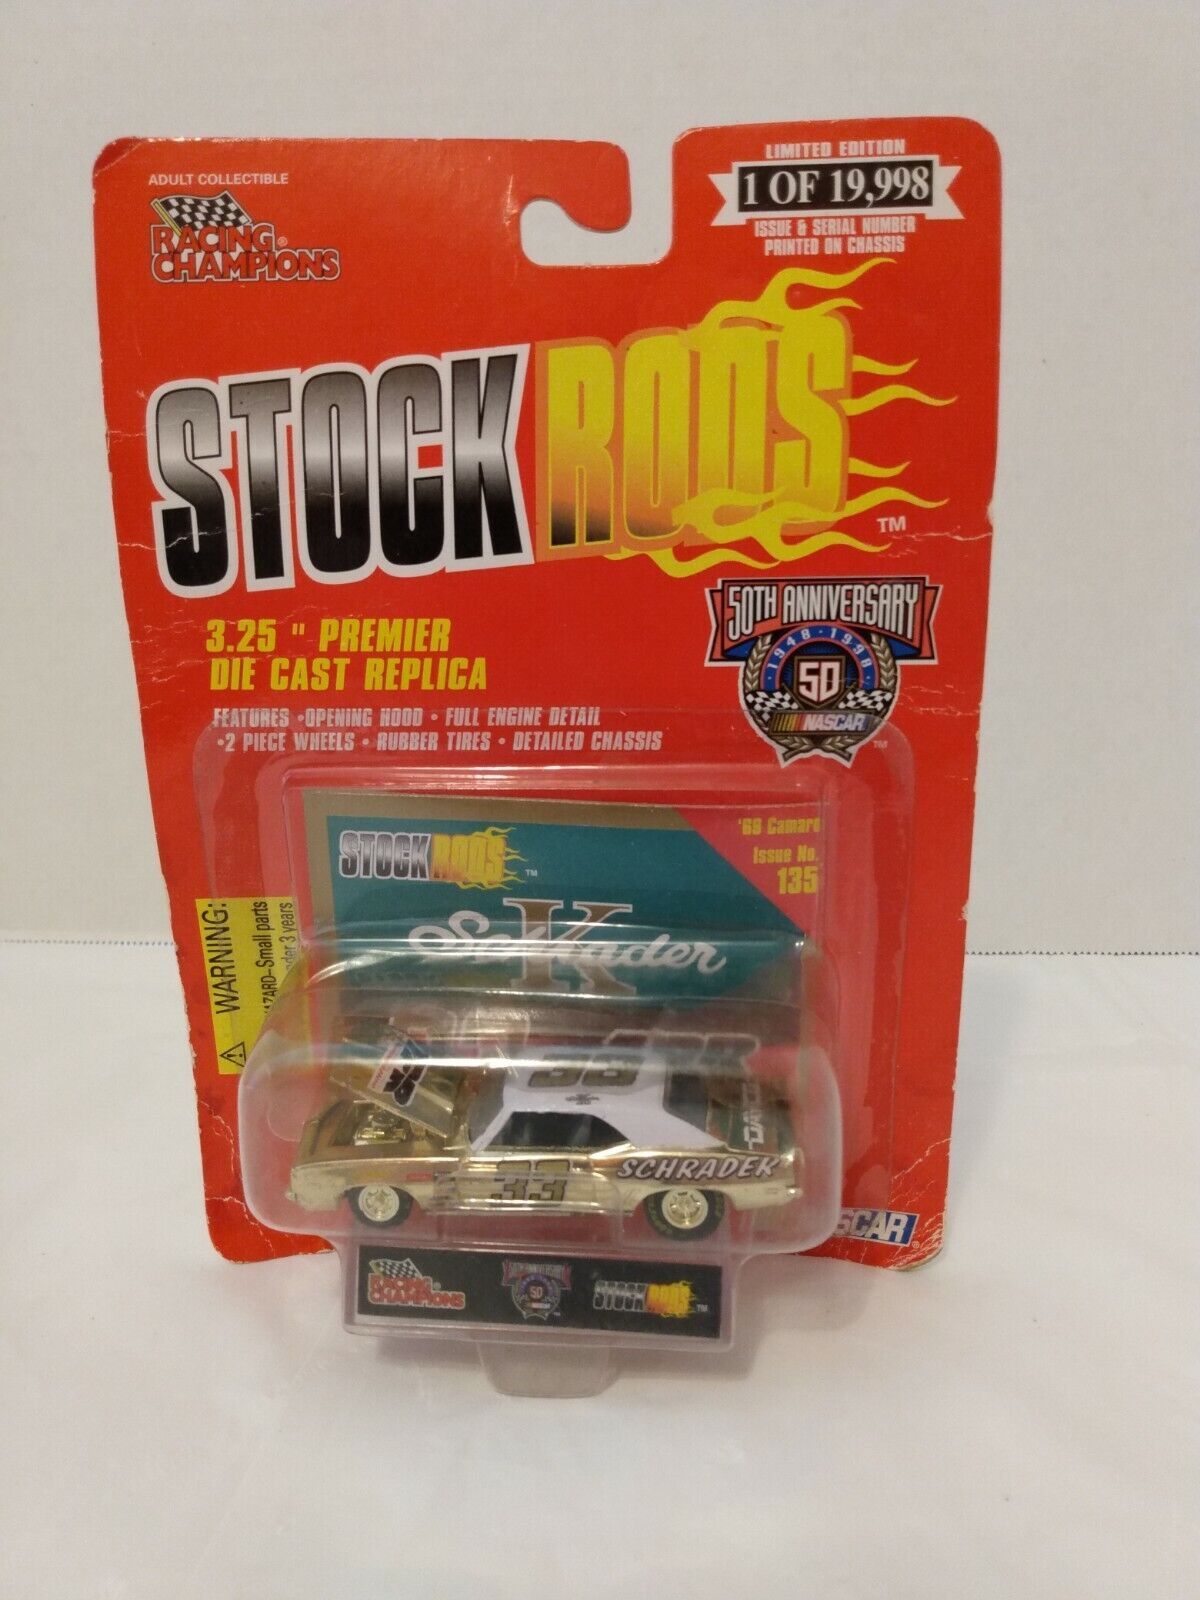 Racing Champions Stock Rods 3.25 Premier R Max 46% OFF Diecast S Manufacturer regenerated product H Replica C